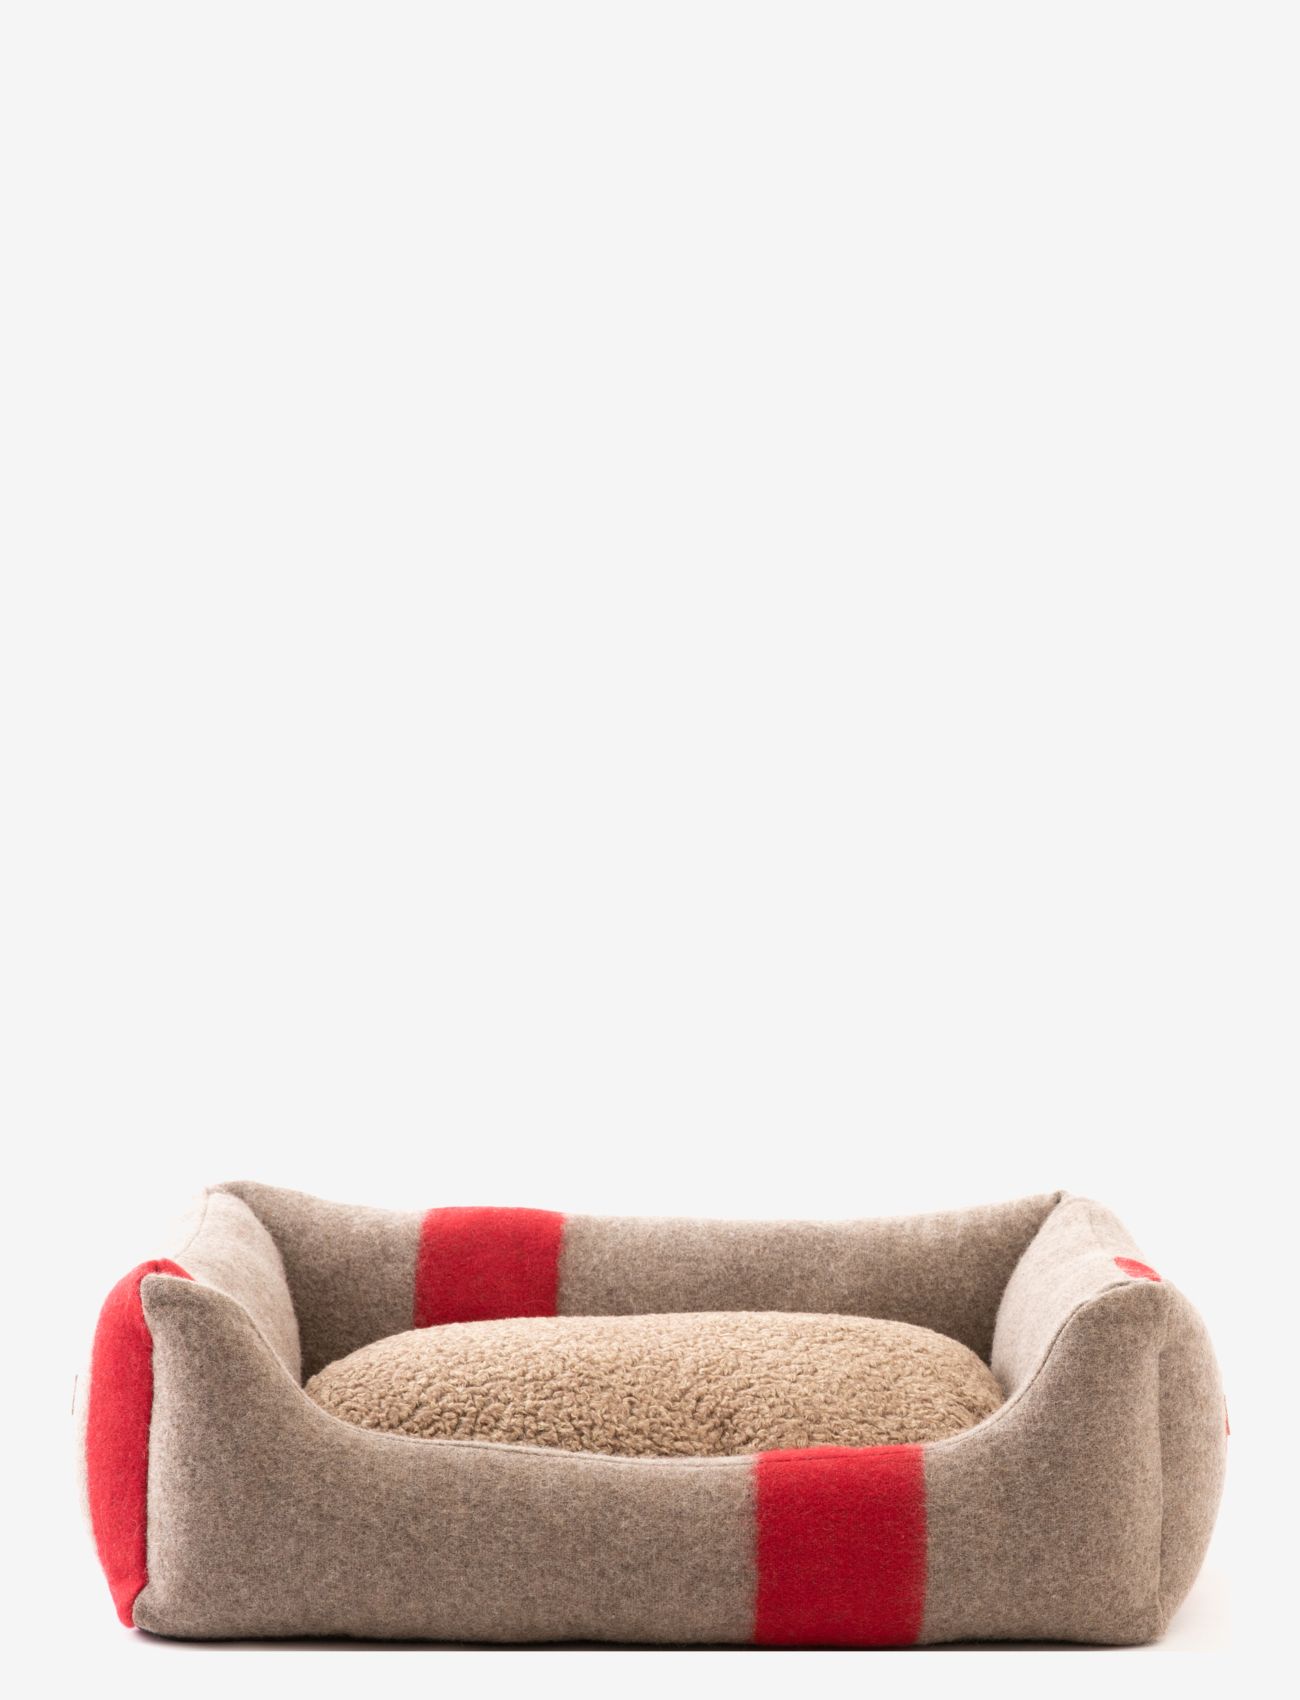 2.8 Design for Dogs - HENRI RECYCLED WOOL - hundebetten - red wool - 1